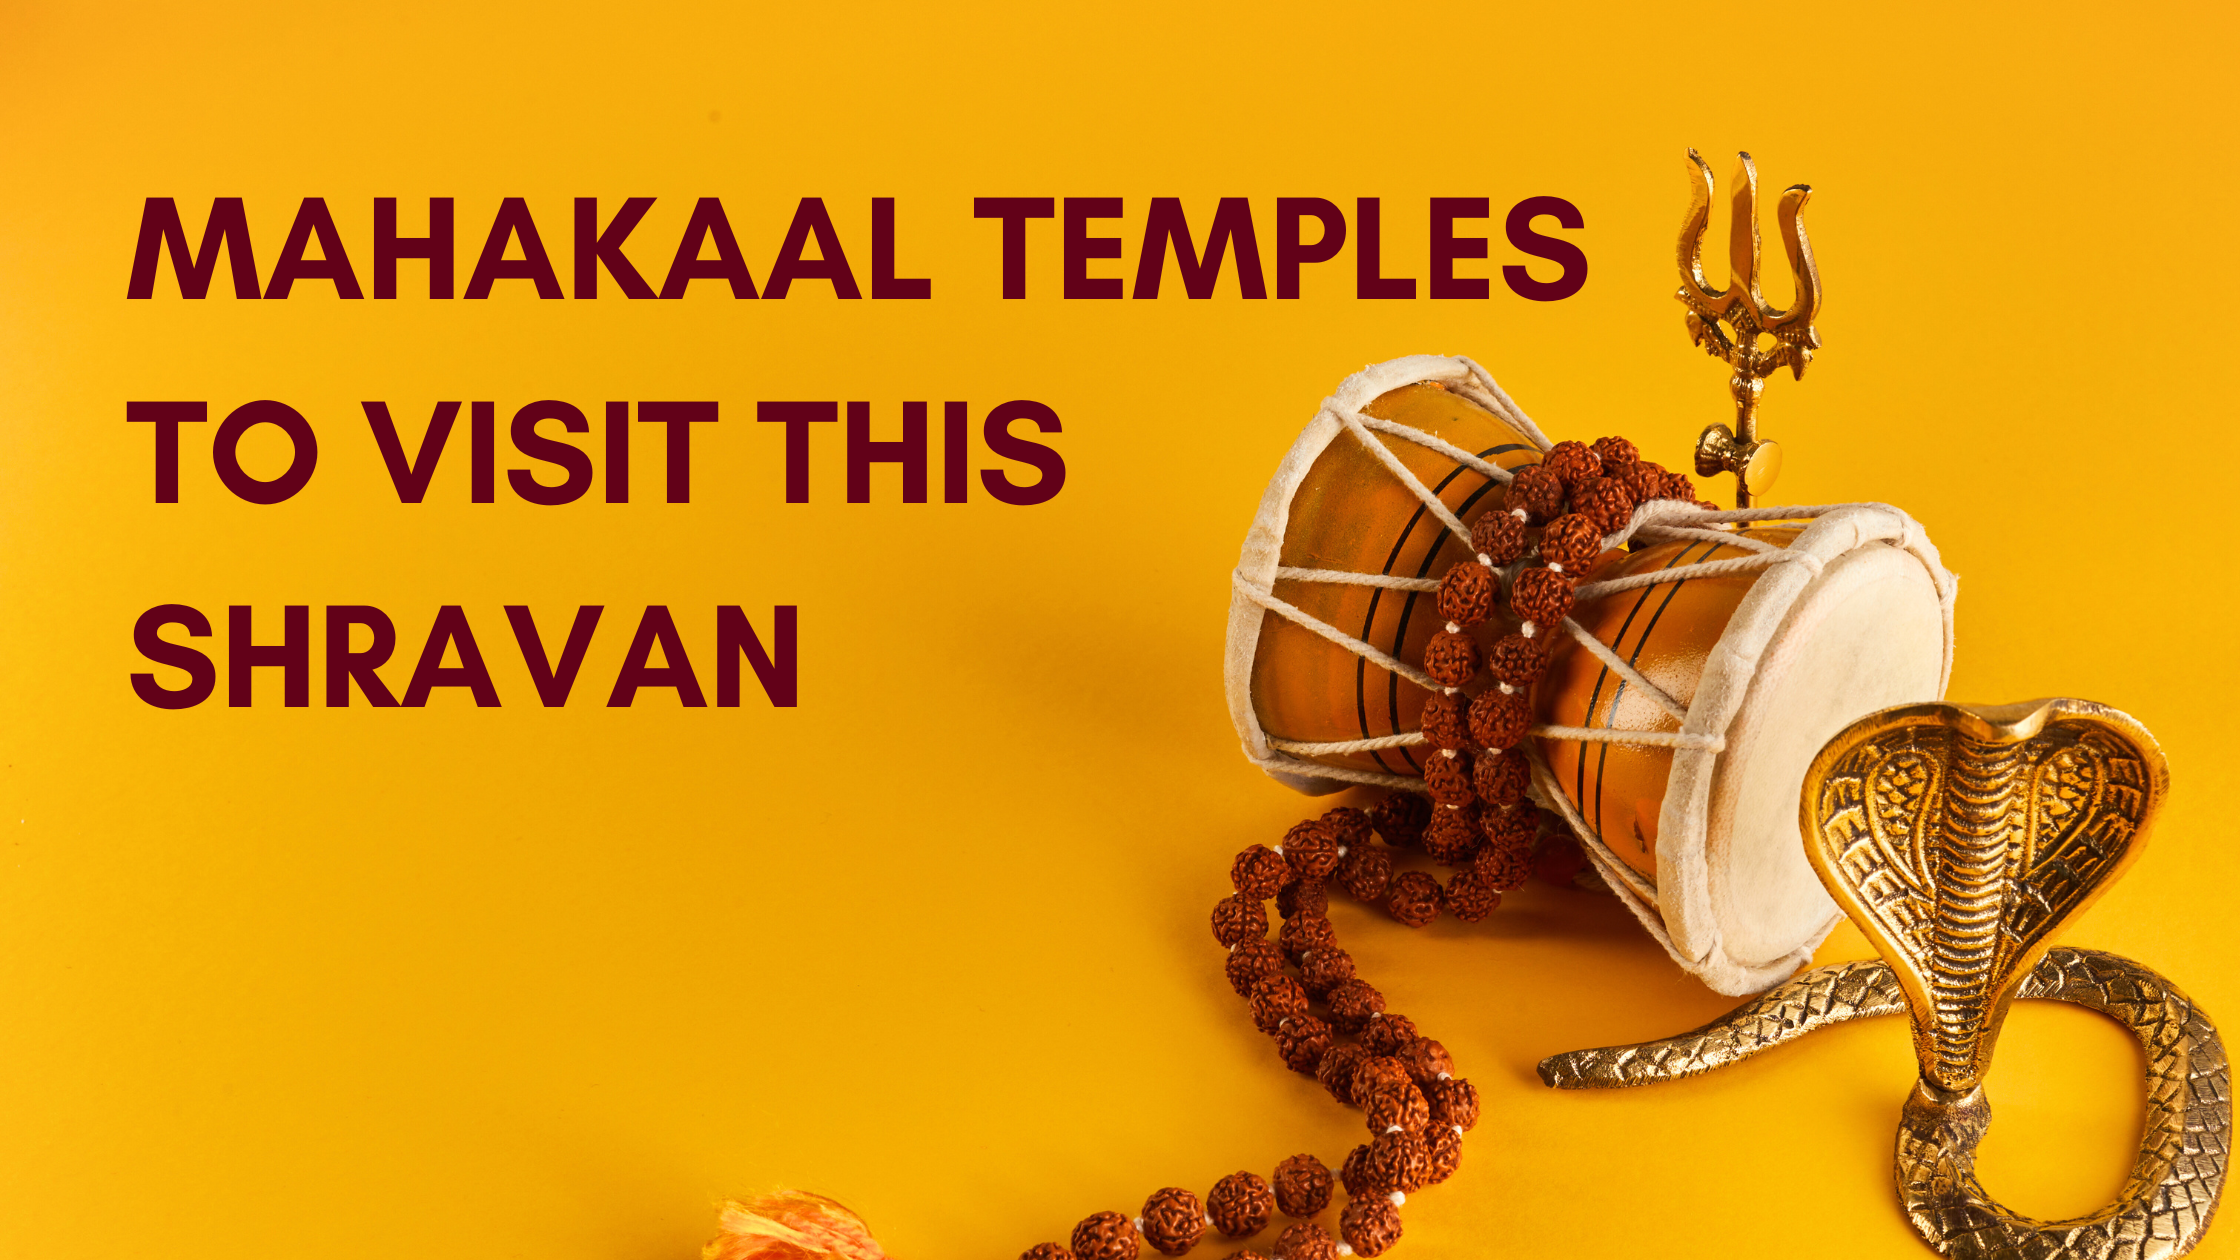 During the Maha Shivratri Day and the month of Shravan, devotees from all across the country visit Shiva temples and show their respect and offer prayers to the mighty God.